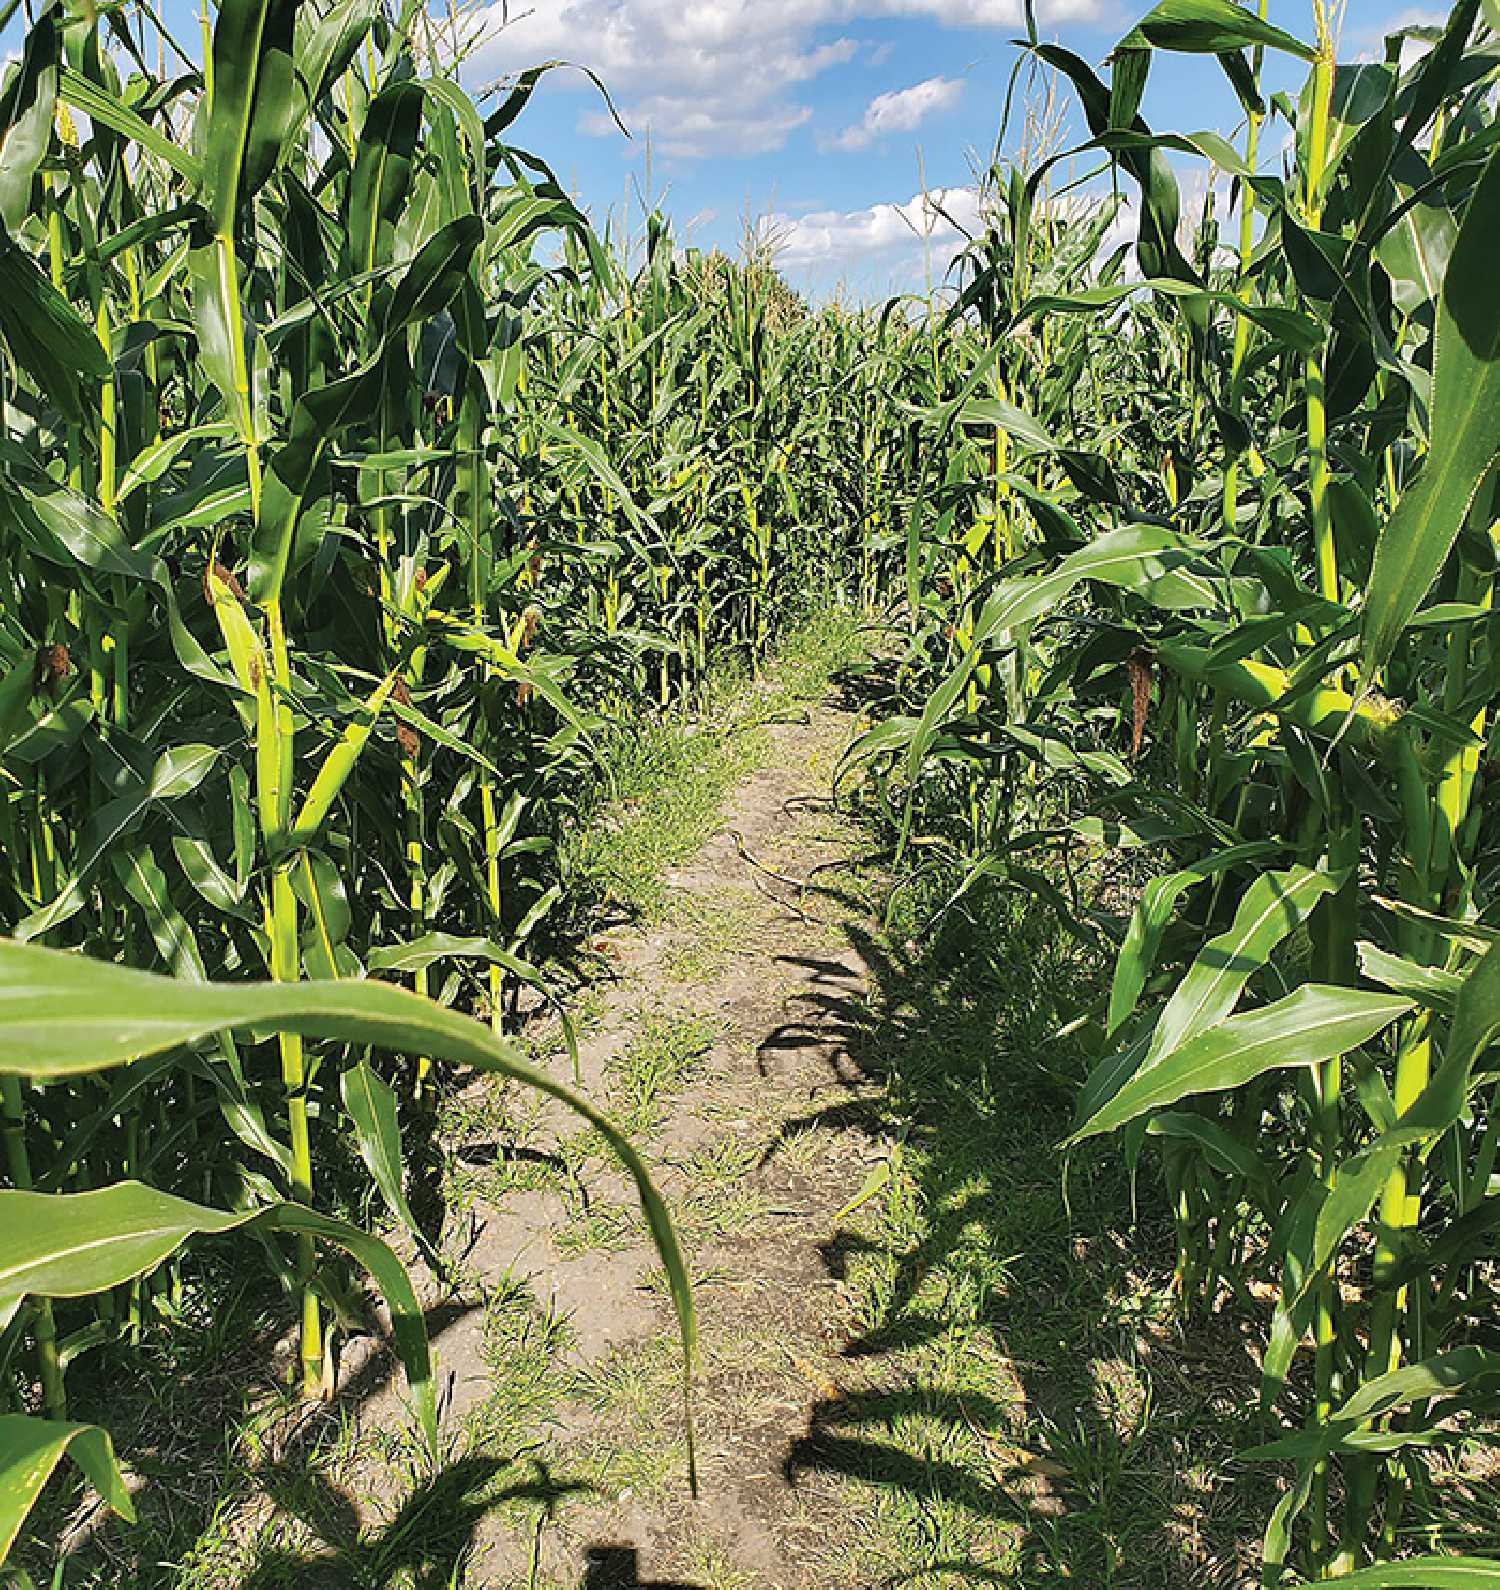 After a successful turnout last year, owner of McAuley Corn Maze said he will be opening up the maze to the public starting August 1.